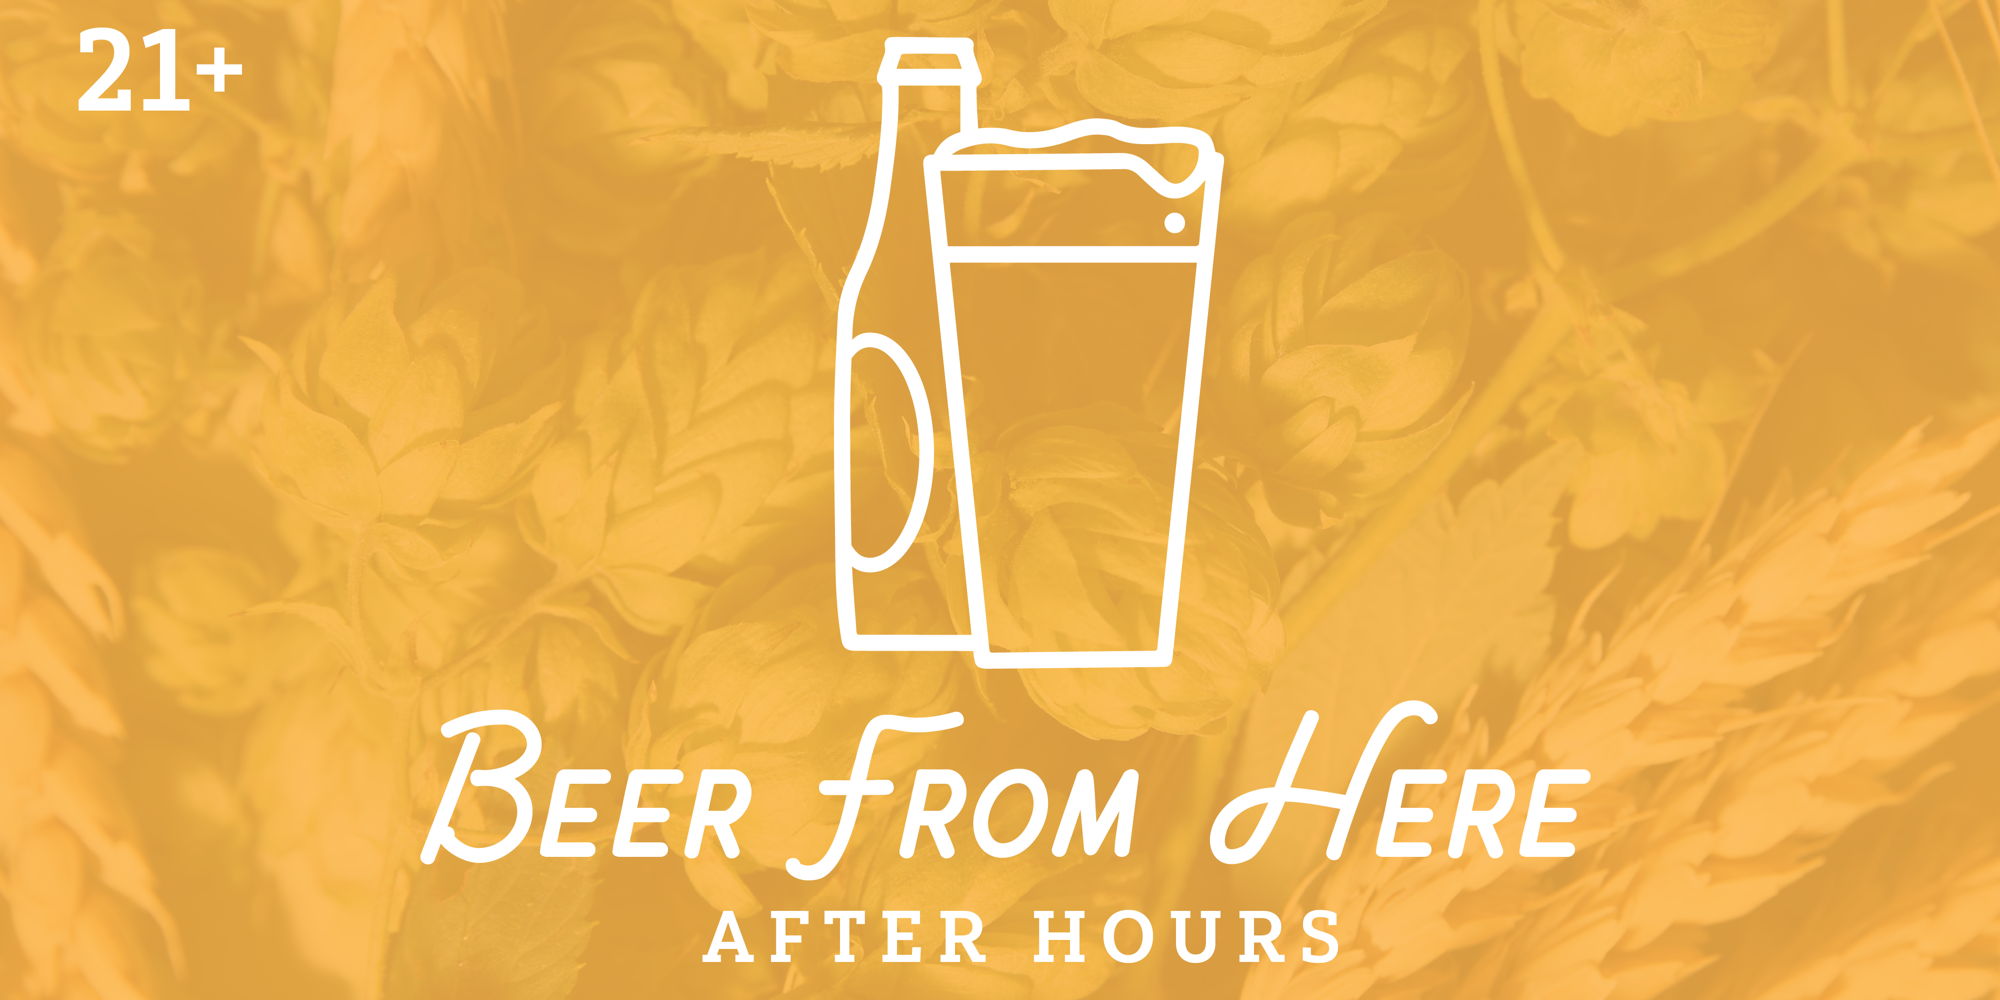 Beer from Here promotional image